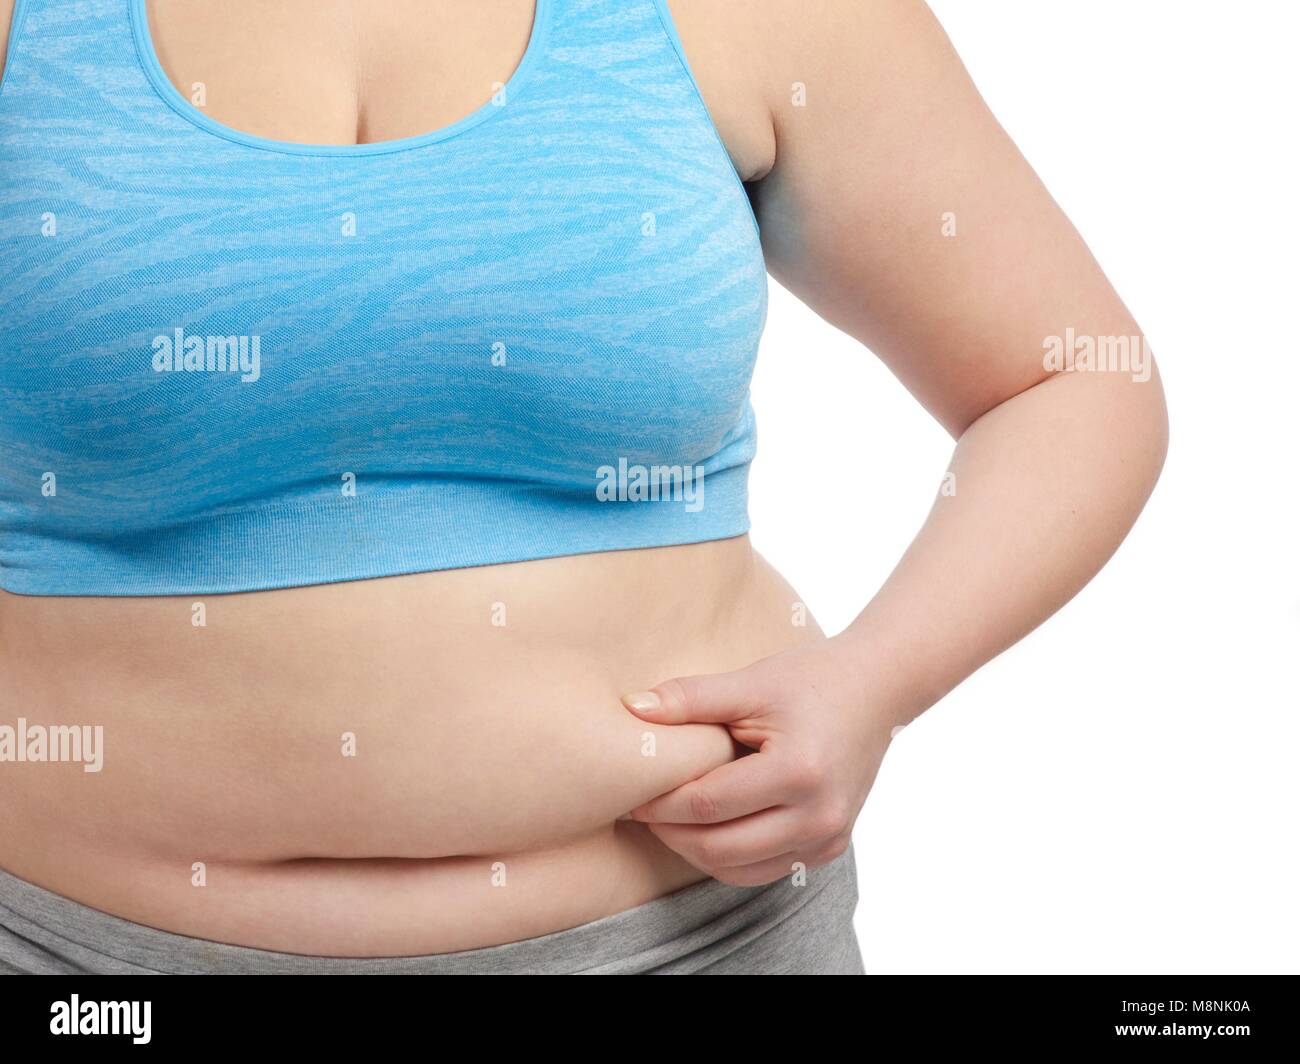 Overweight woman holding the fat around her waist. Stock Photo